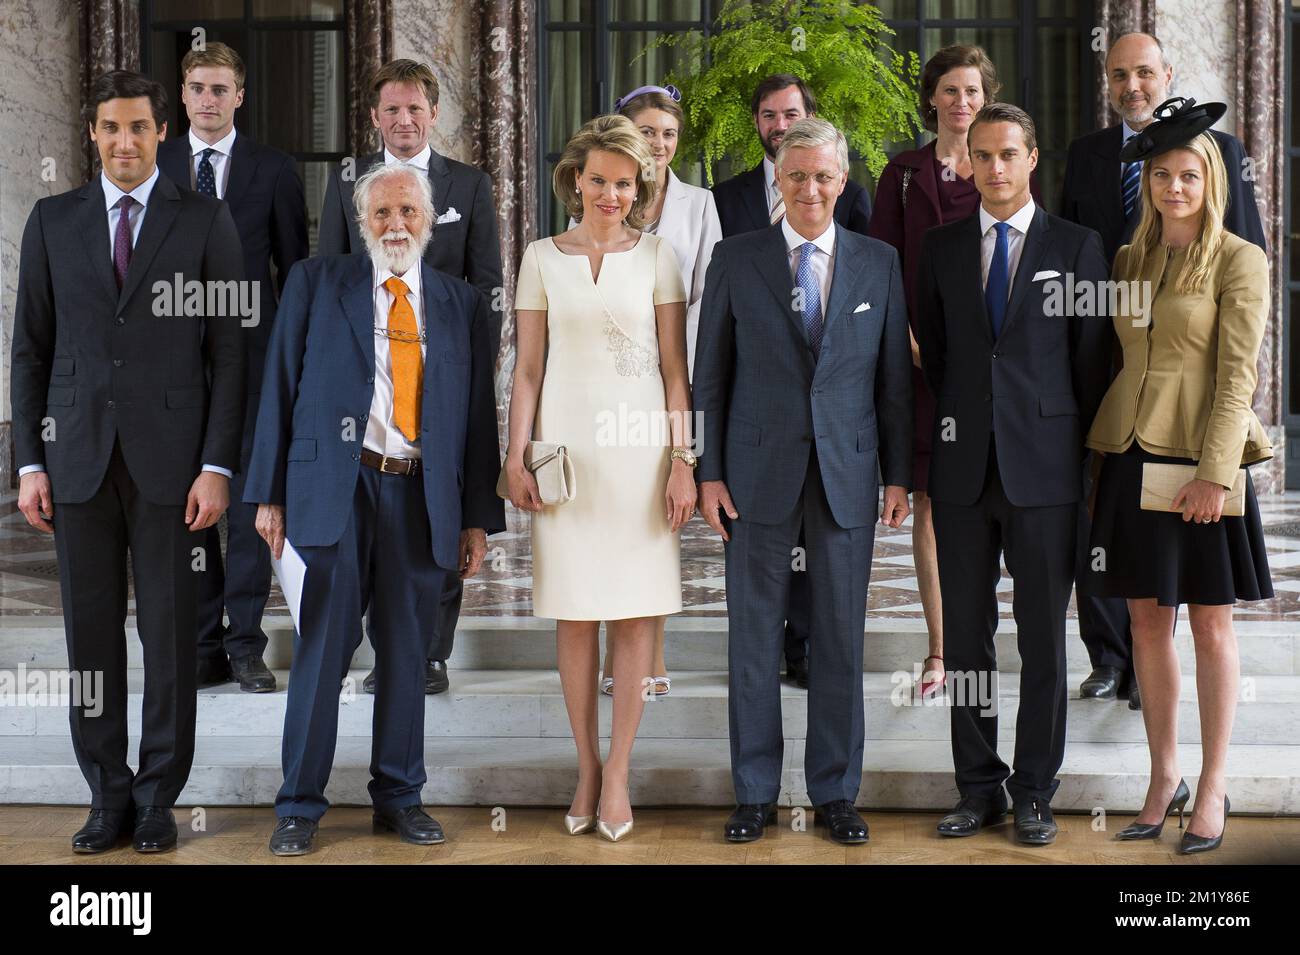 20150617 - BRUSSELS, BELGIUM: (Back, from L to R) Lord Frederick Wellesley, Prince Pieter-Christiaan d'Orange-Nassau, Belgian Countess Stephanie de Lannoy, Prince Guillaume, hereditary Grand-Duke of Luxembourg, Grafin Blucher von Wahlstatt, Lukas Graf Blucher von Wahlstatt (Front, from L to R) Prince Jean-Christophe Napoleon, Prince Nikolaus Furst Blucher von Wahlstatt, Queen Mathilde of Belgium, King Philippe - Filip of Belgium, Arthur Gerald Wellesley, Earl of Mornington and Jemma Wellesley, Marchioness of Douro pose for a family portrait at a reception given by Belgian royal couple with Lux Stock Photo